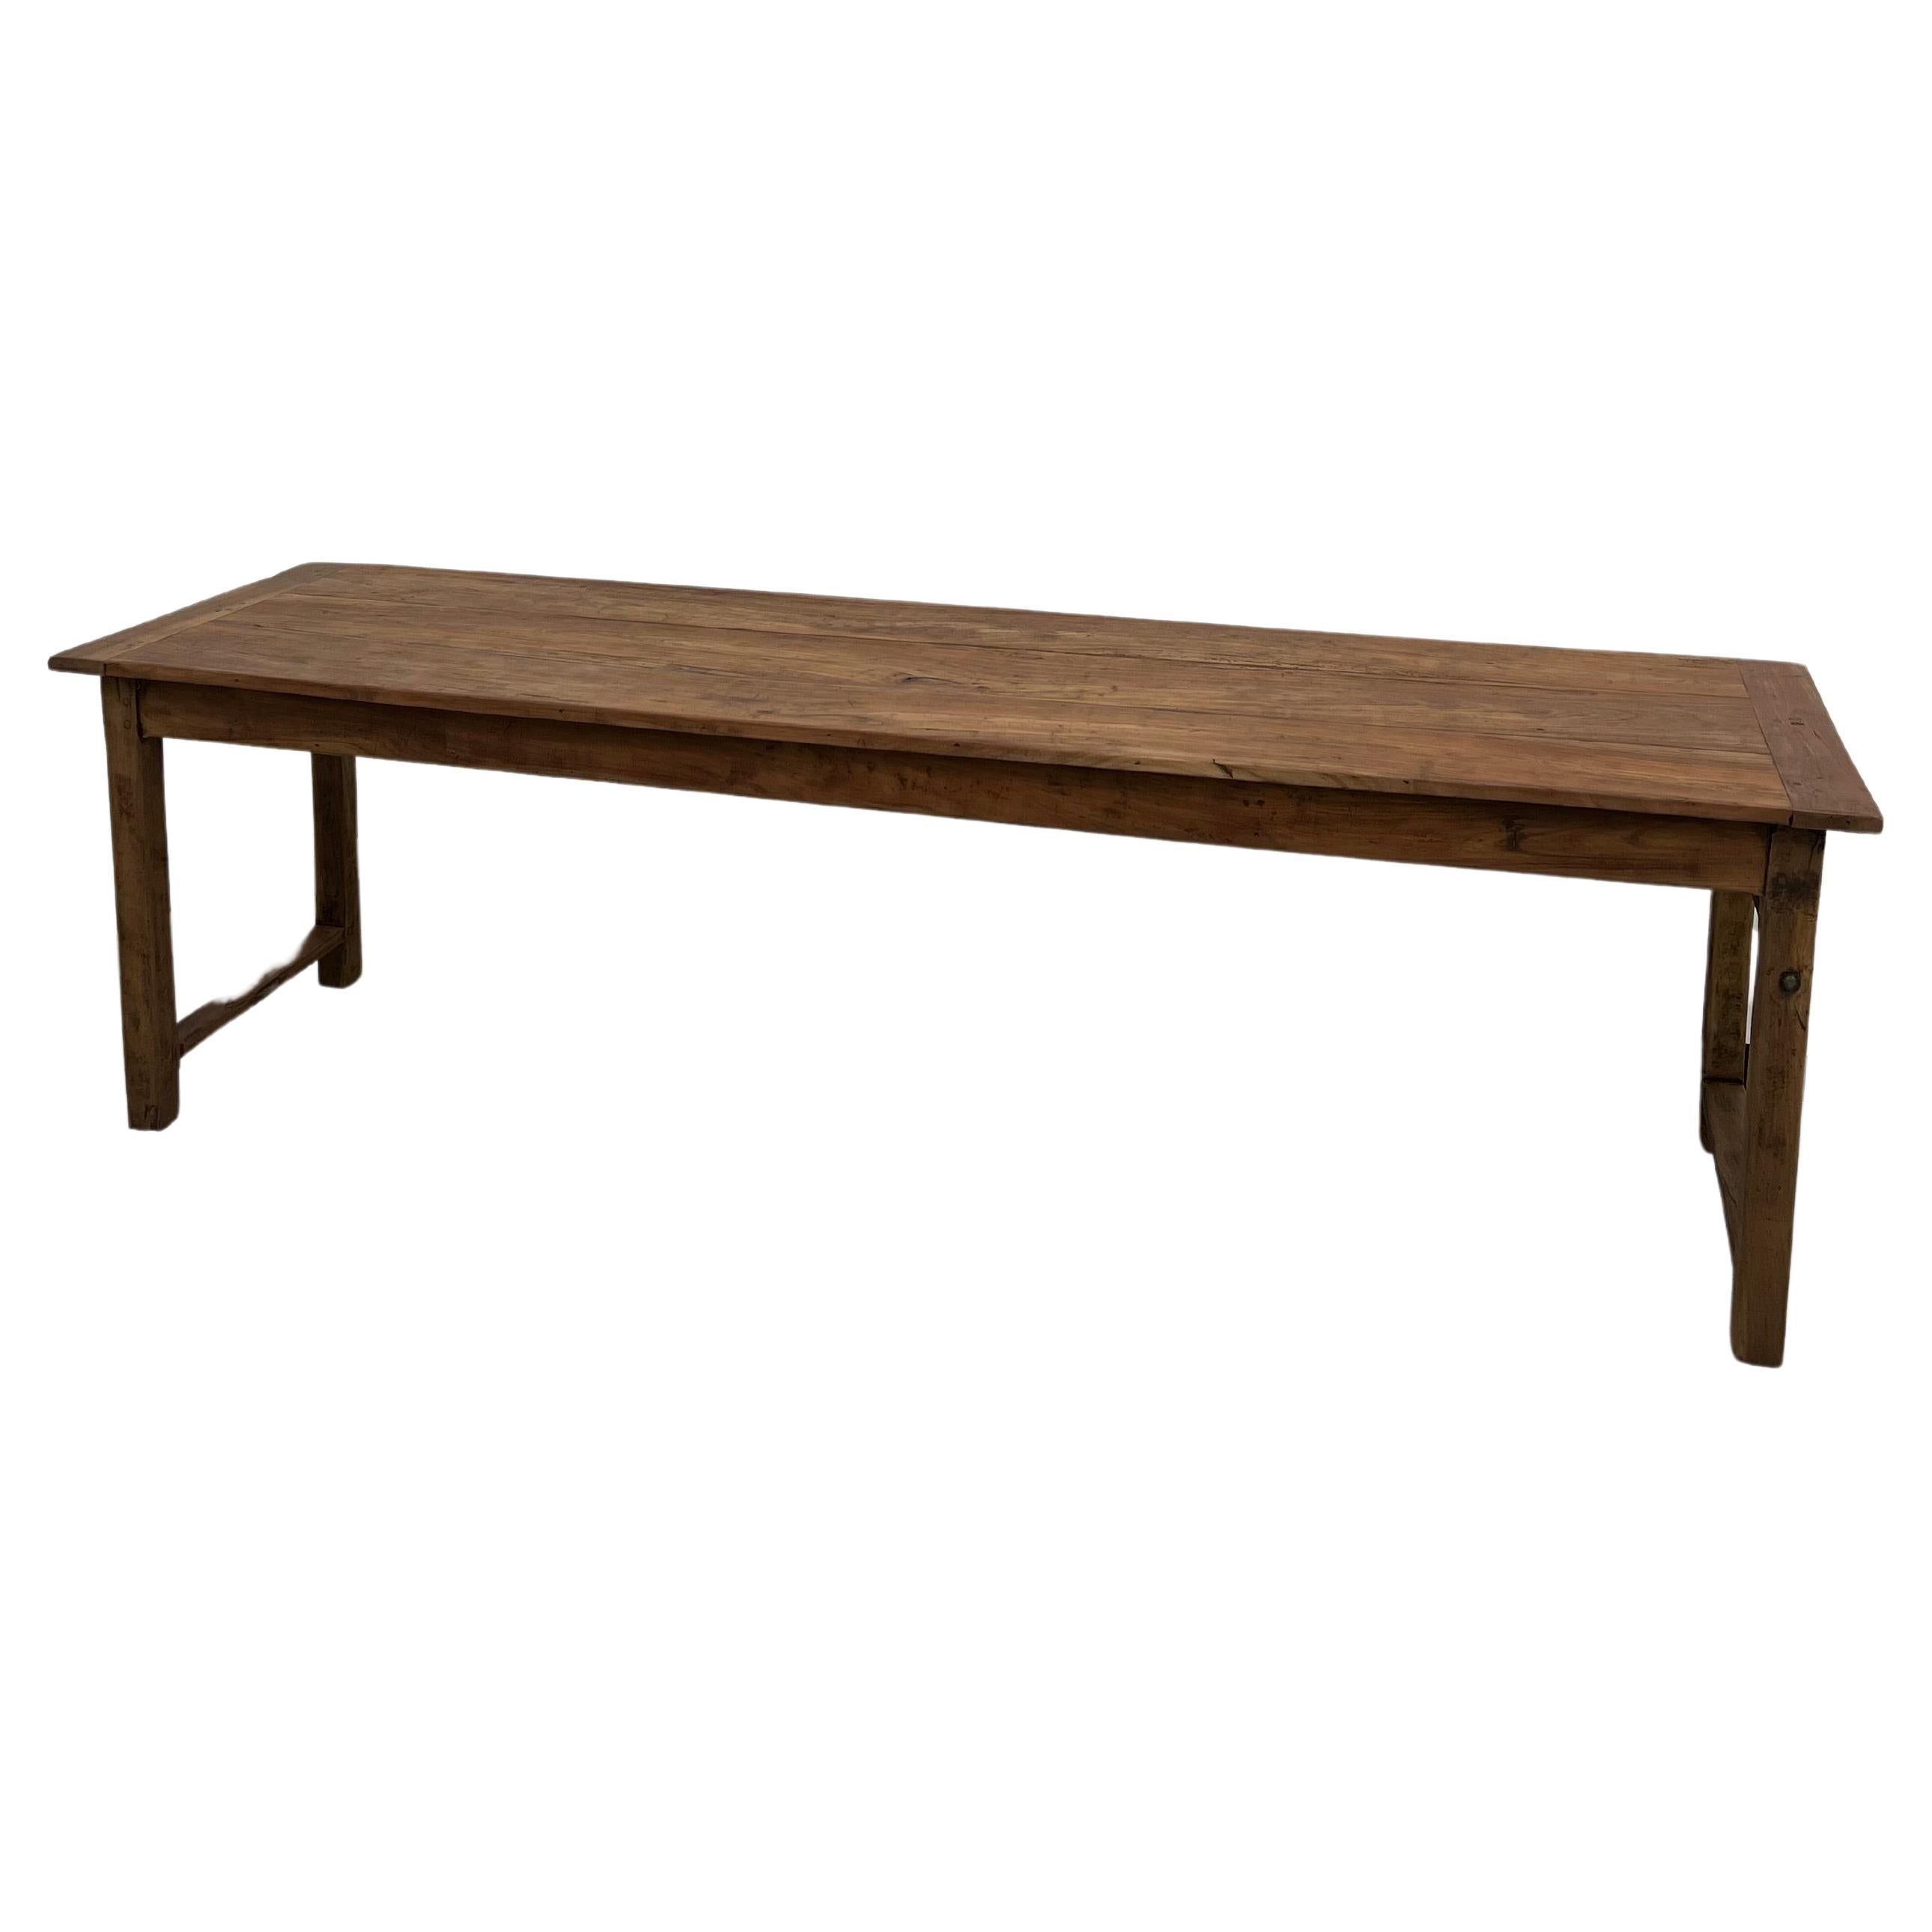 Late 19th century farm table in solid cherry wood For Sale